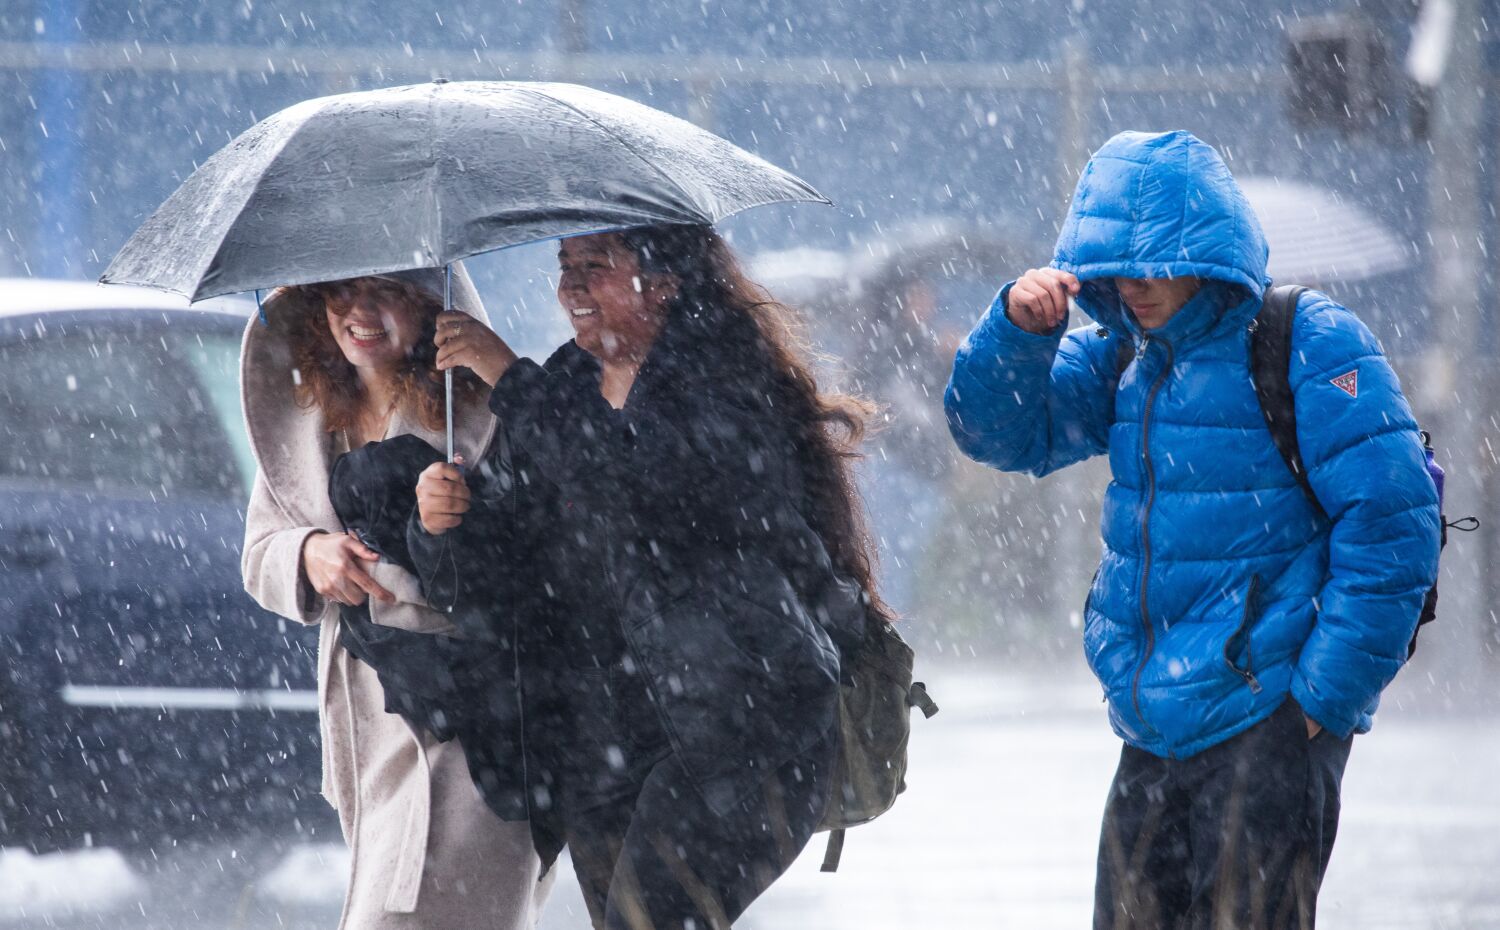 The California chill: State recoreded fifth-coldest March in 129 years amid storms, snow